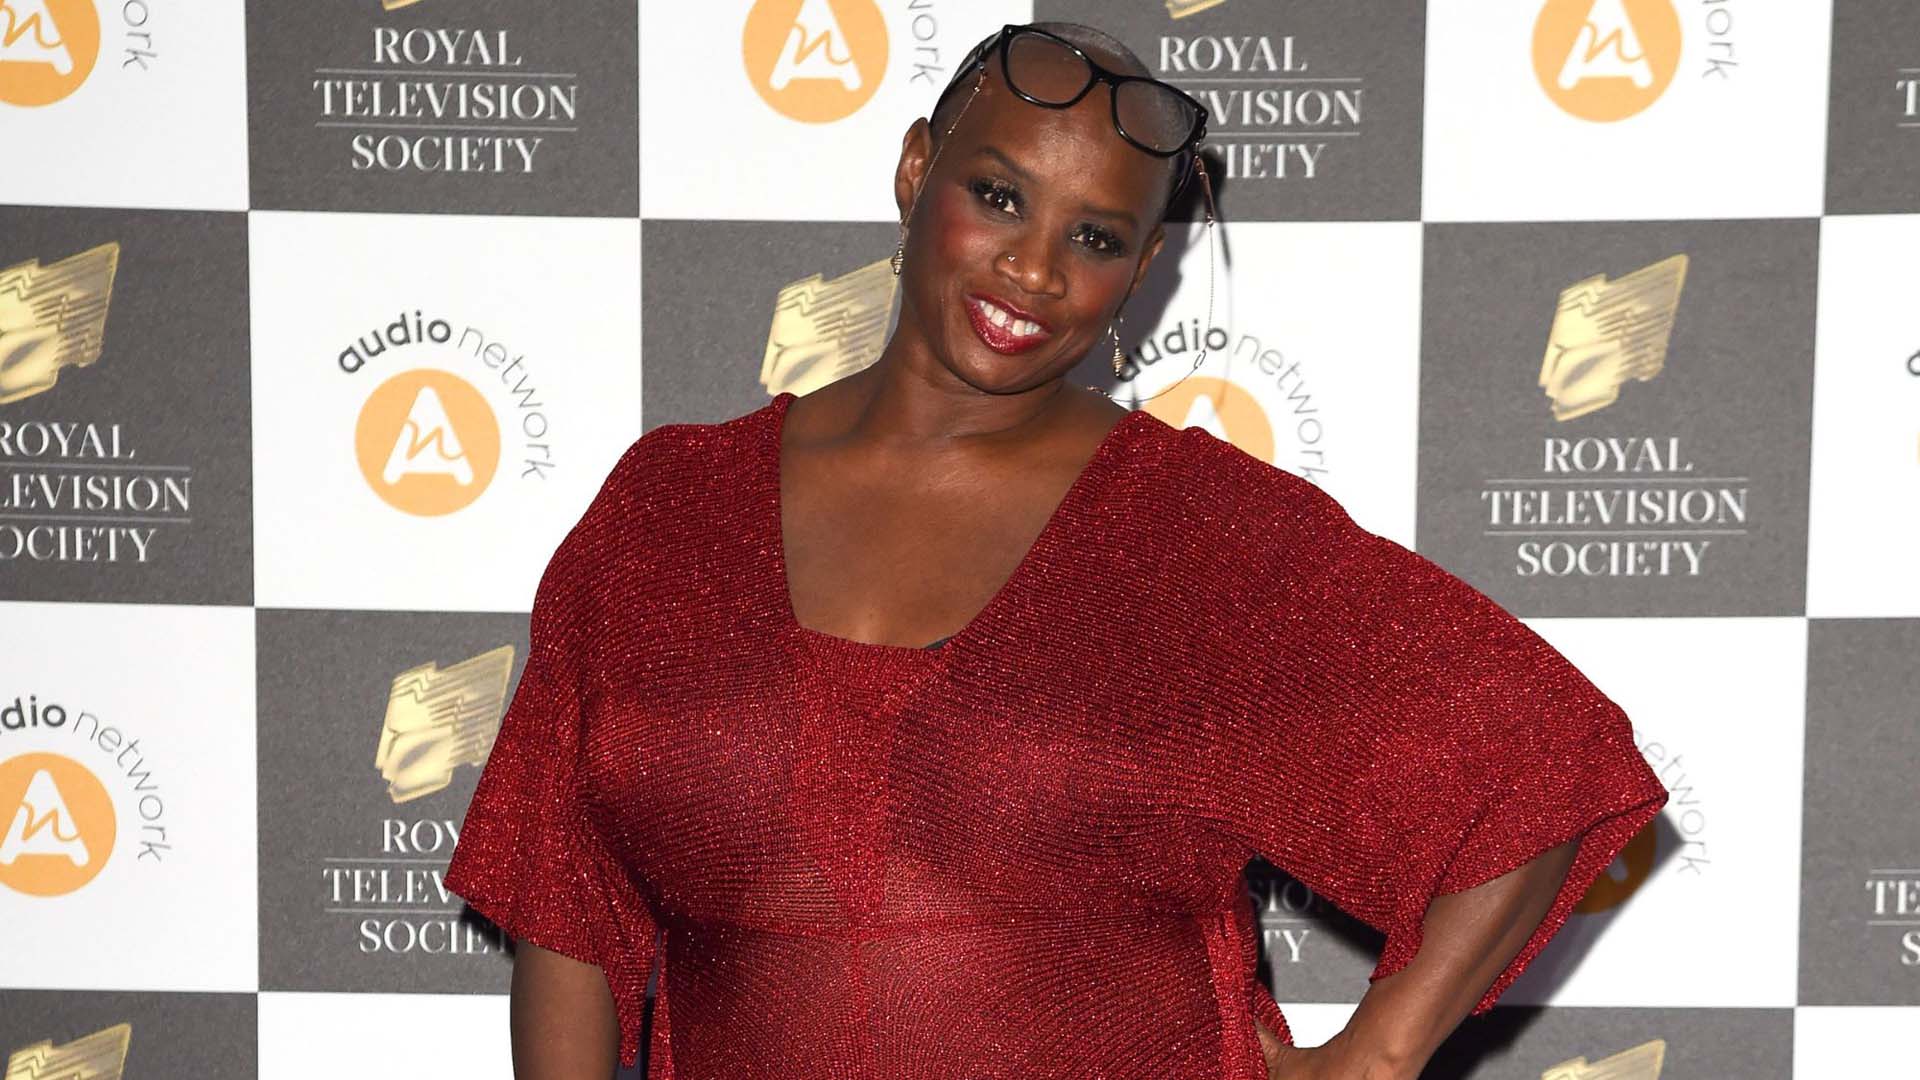 Headshot of Andi Oliver on the red carpet in a red dress